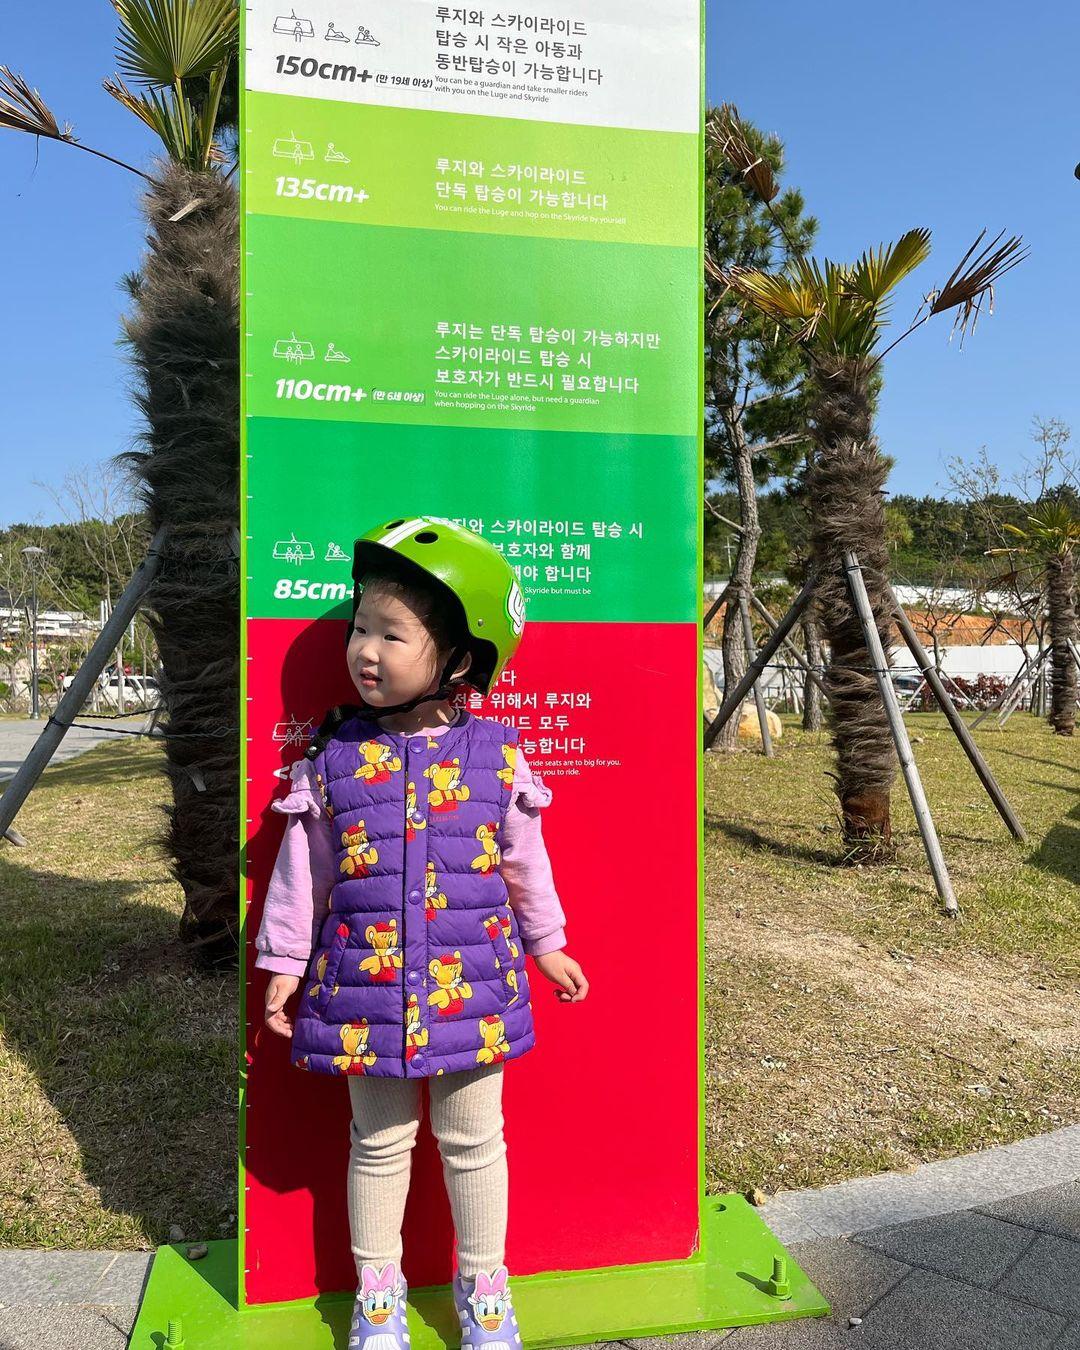 A small child checks her height to ride the Luge at Busan.